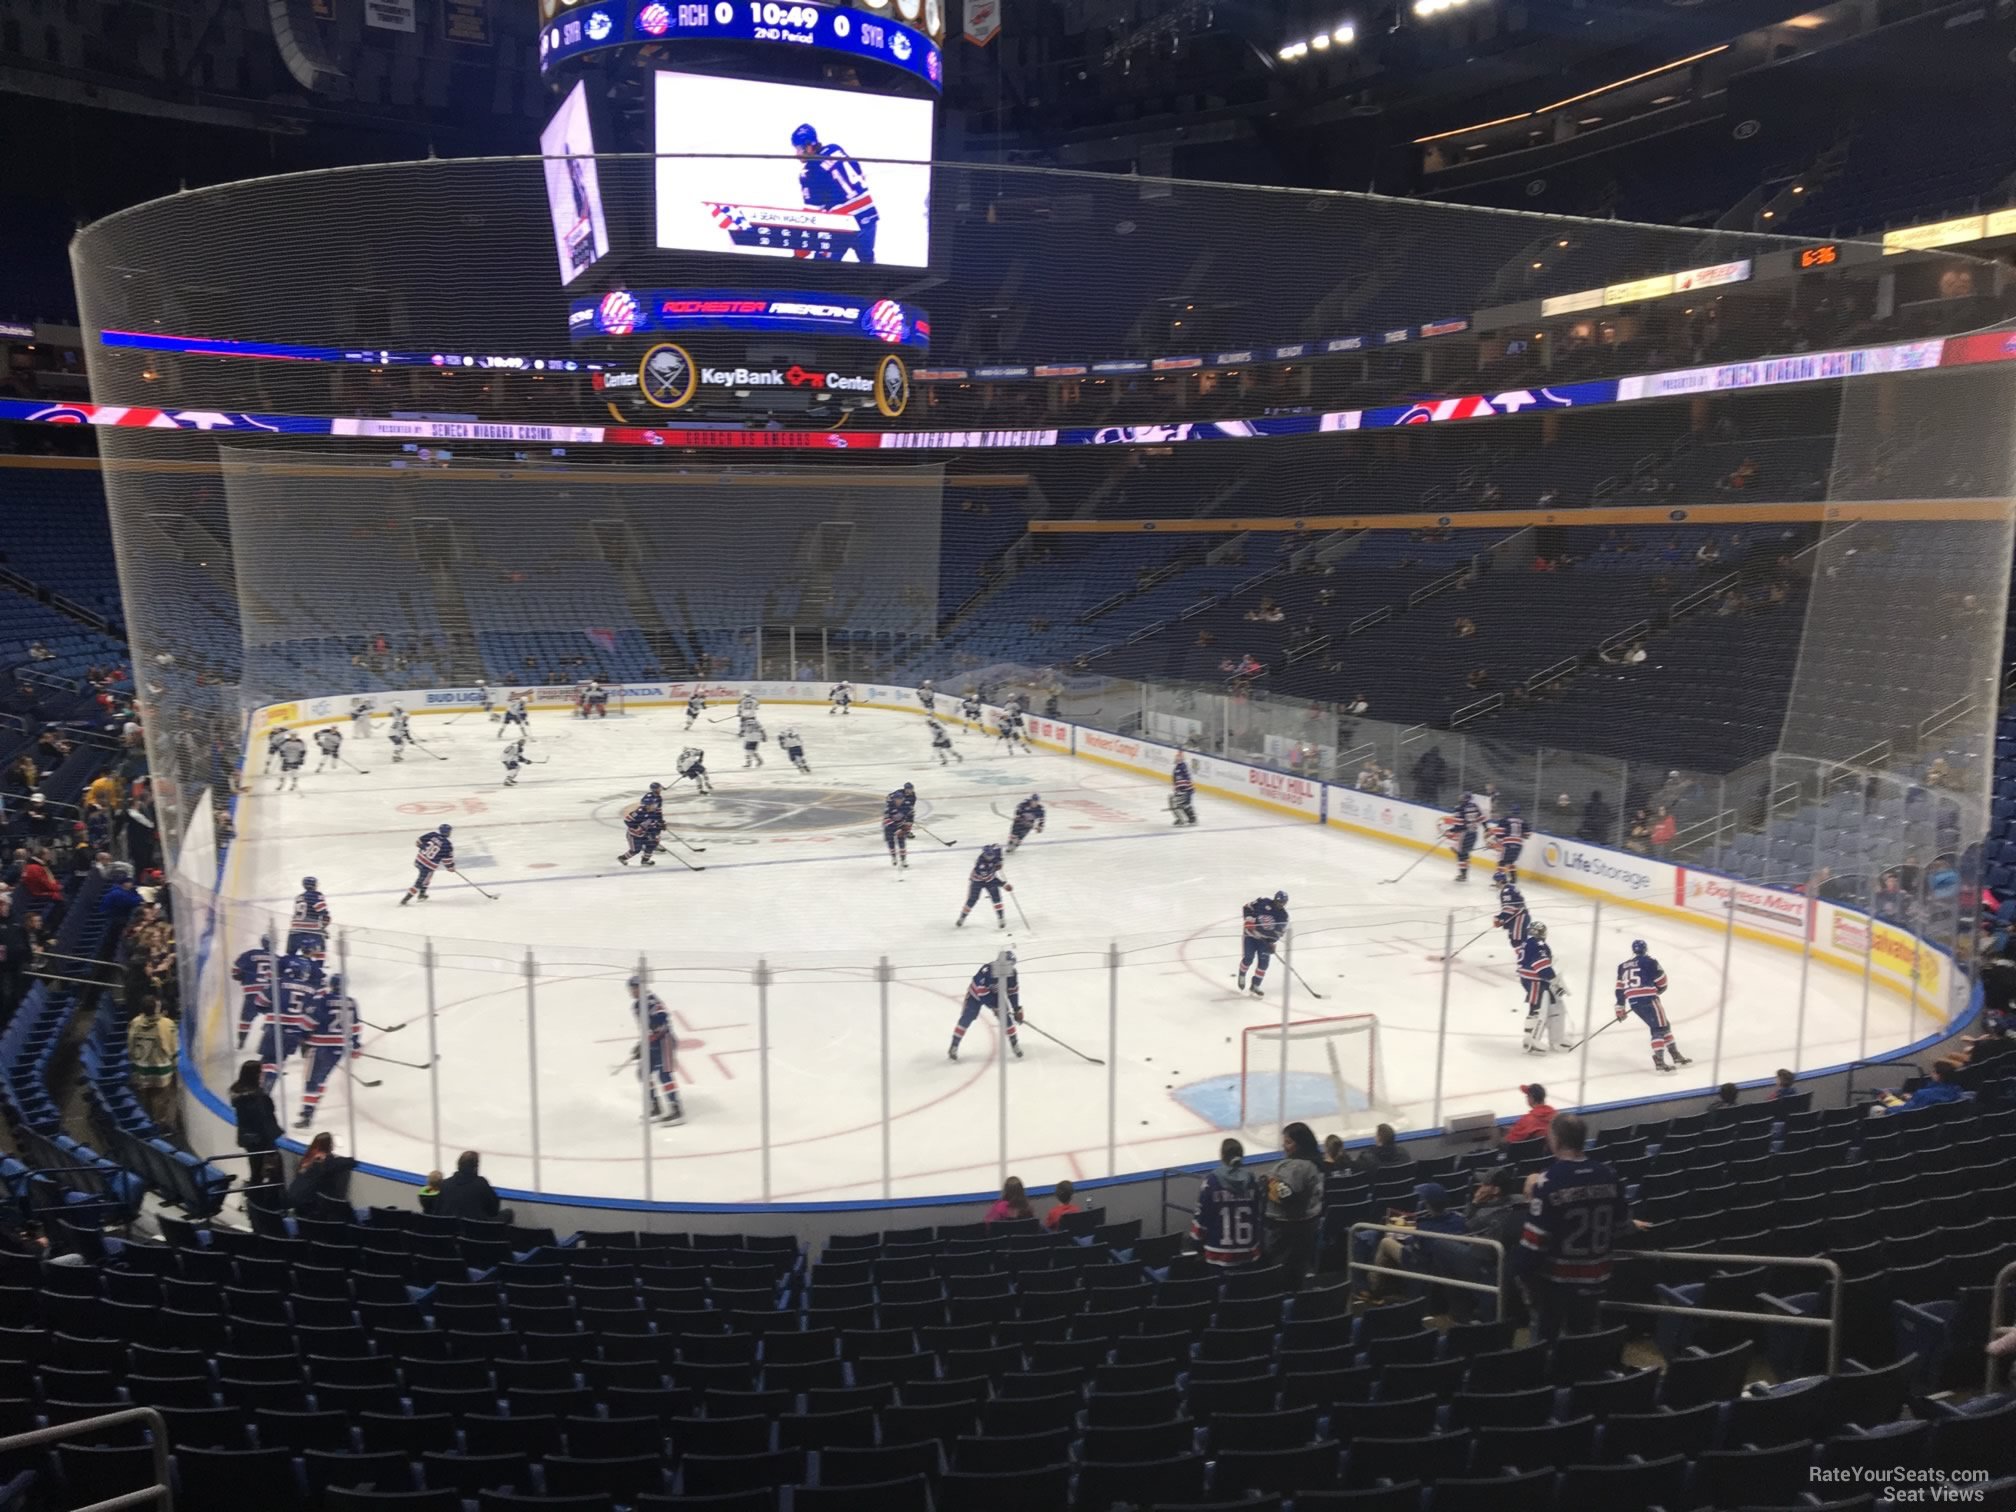 section 100, row 22 seat view  for hockey - keybank center